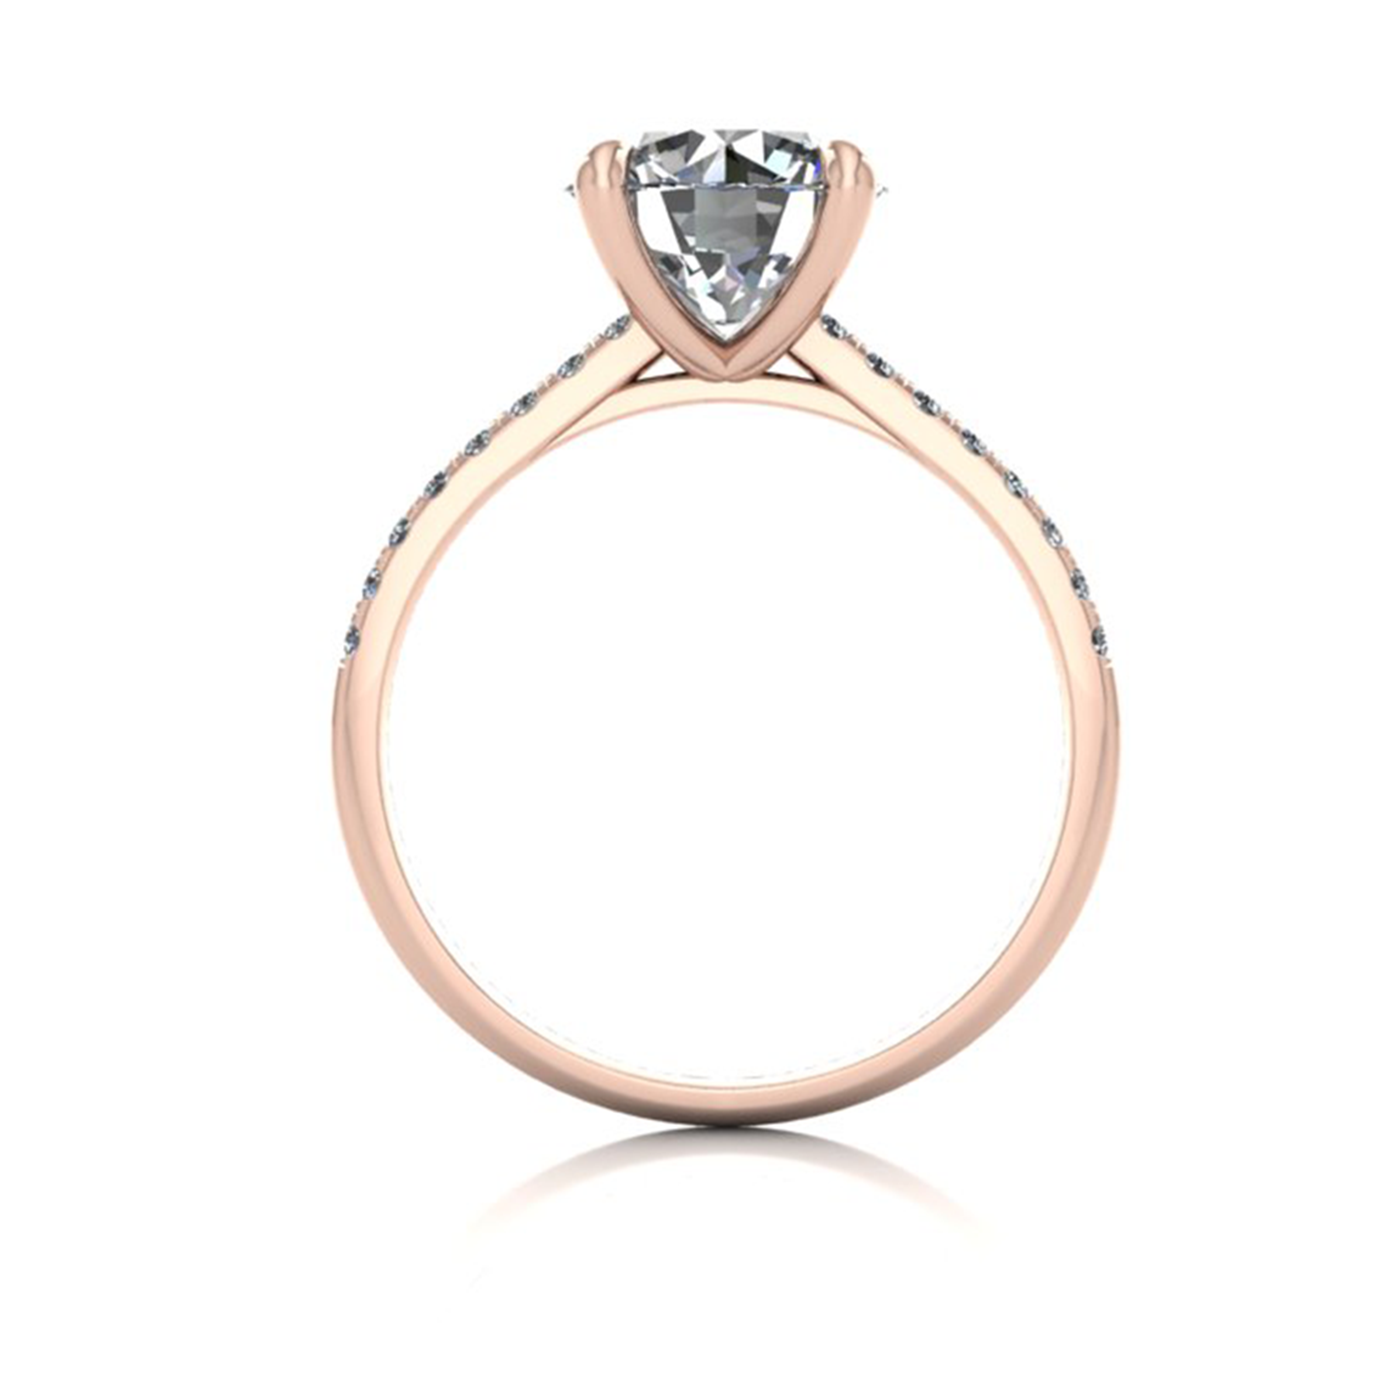 18k rose gold 2.0ct 4 prongs round cut diamond engagement ring with whisper thin pavÉ set band